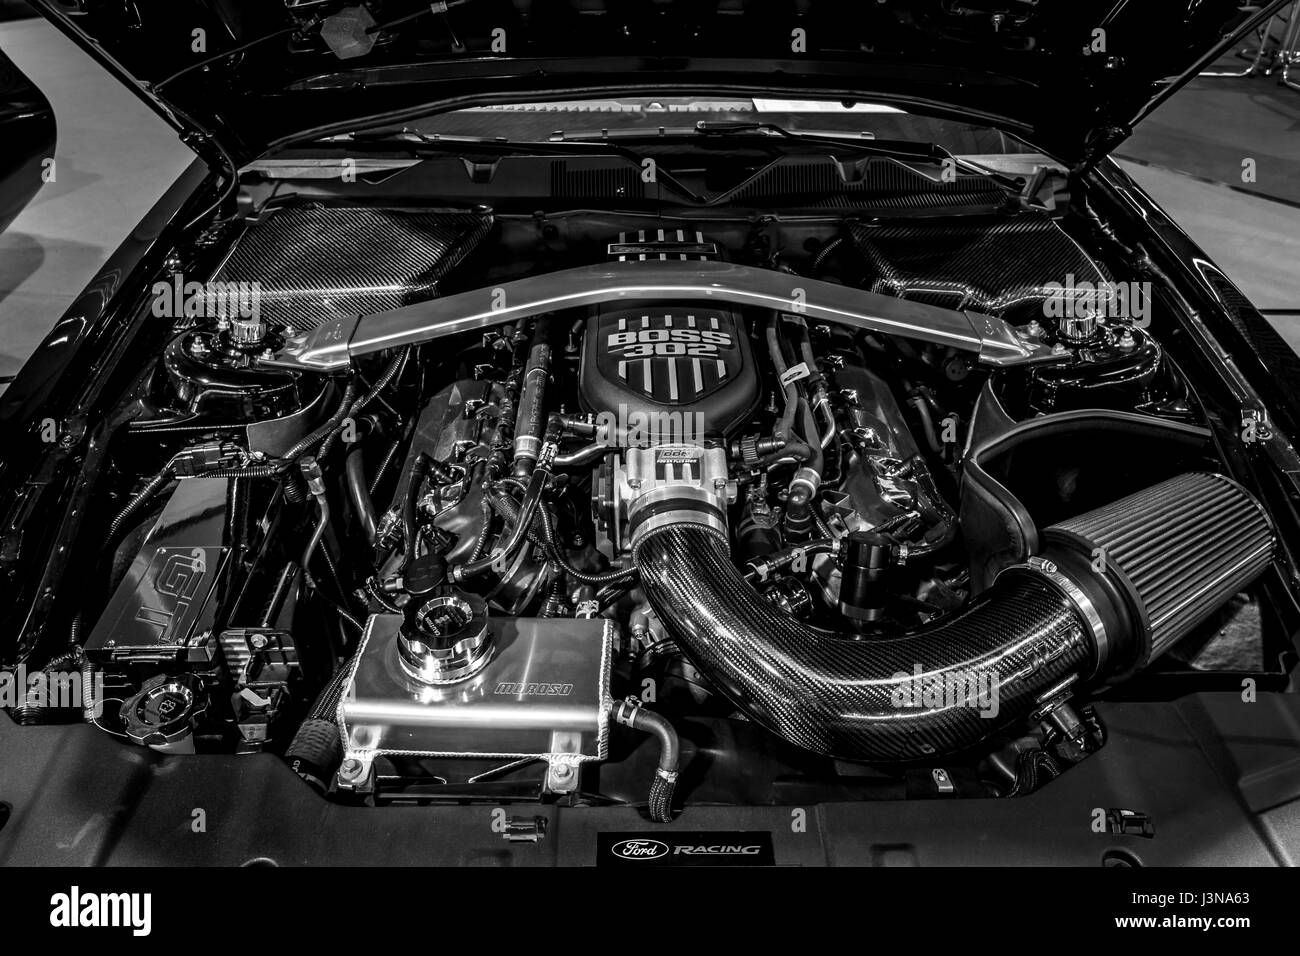 STUTTGART, GERMANY - MARCH 03, 2017: Engine of the Ford Mustang GT 'Warrior' U.S. Army Special Edition, 2014. Close-up. Black and white. Europe's greatest classic car exhibition 'RETRO CLASSICS' Stock Photo